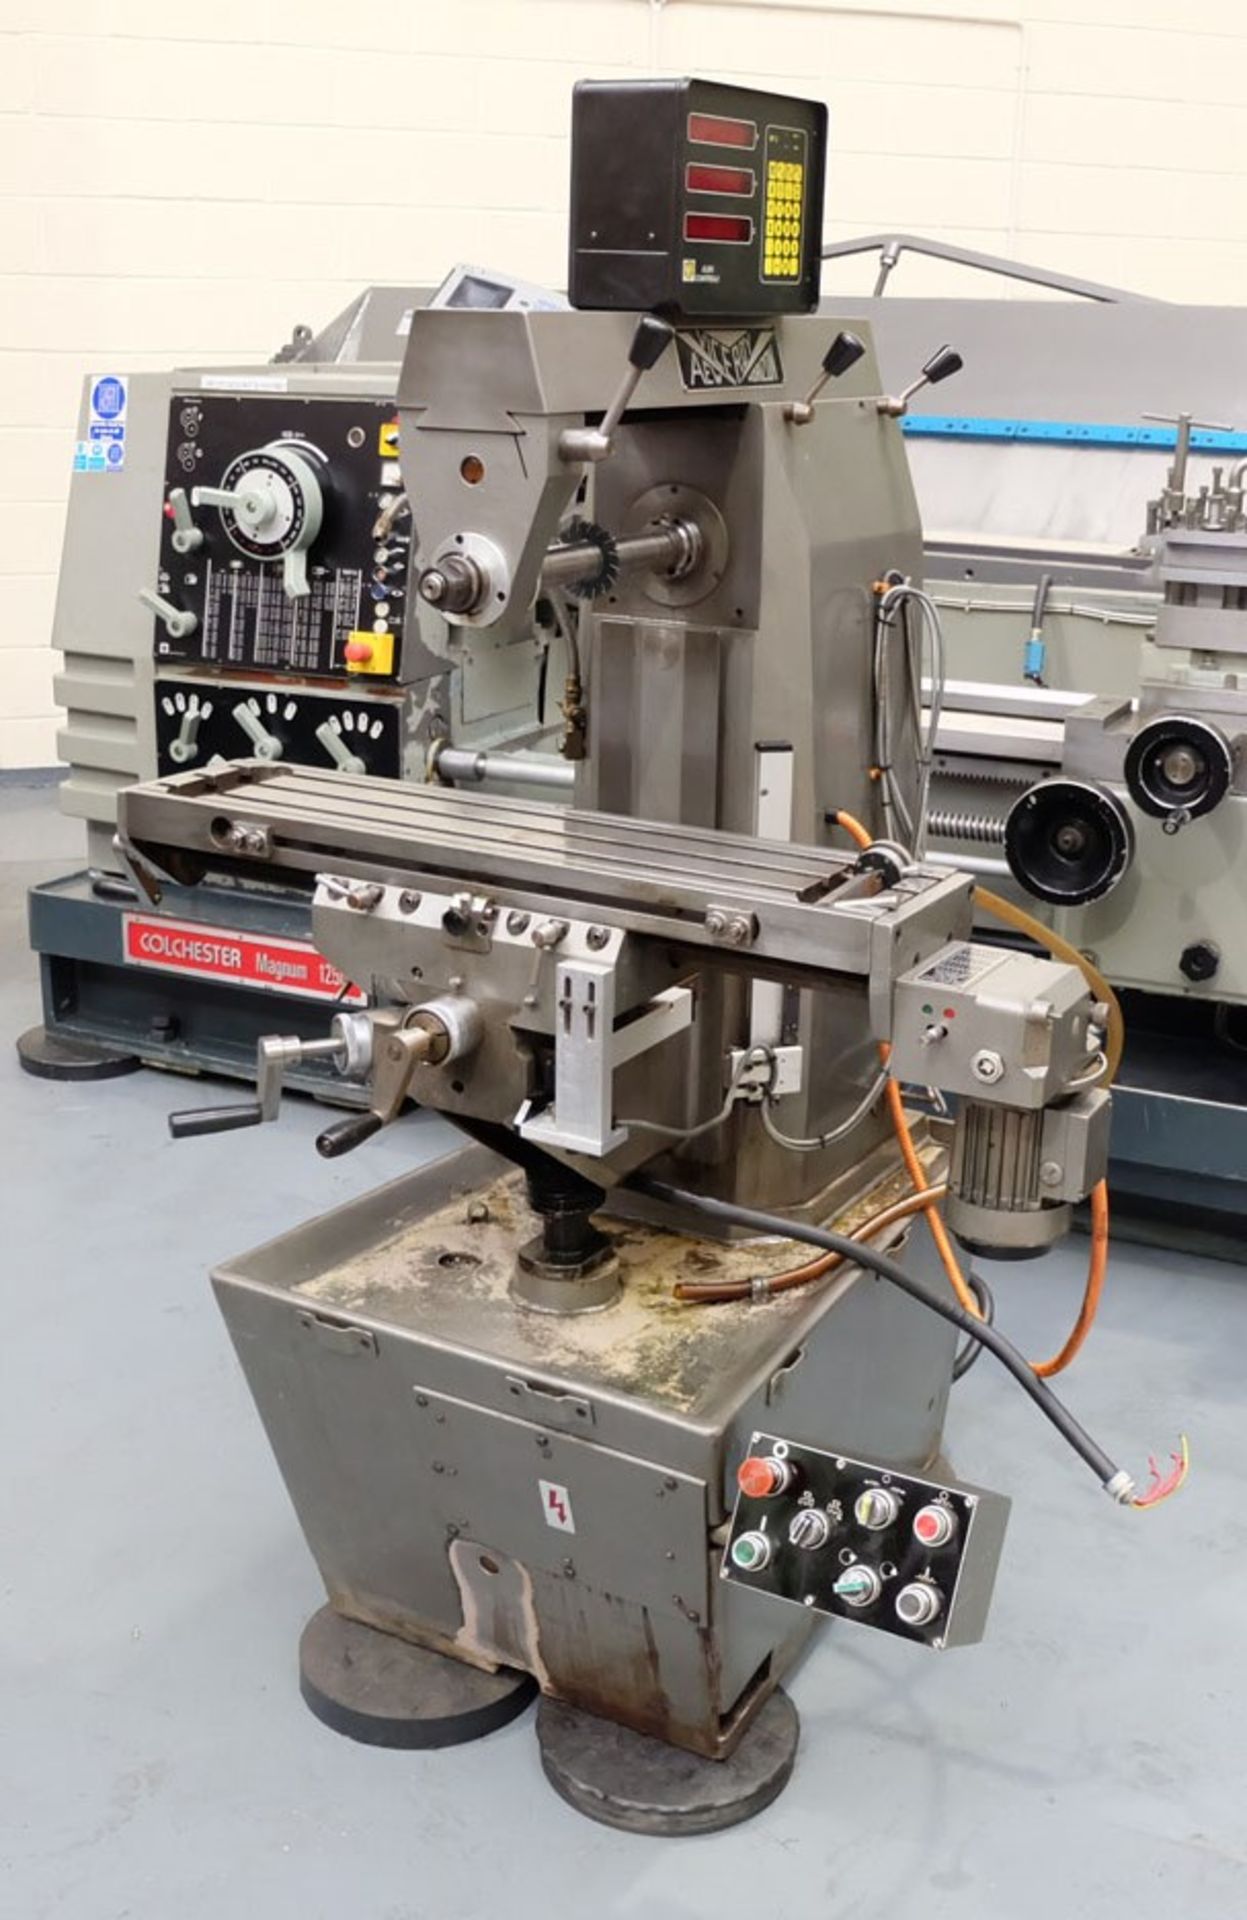 An AEW VICEROY HORIZON Horizontal Milling Machine: Table 35in x 8in, Power Feed in X Axis, Spindle